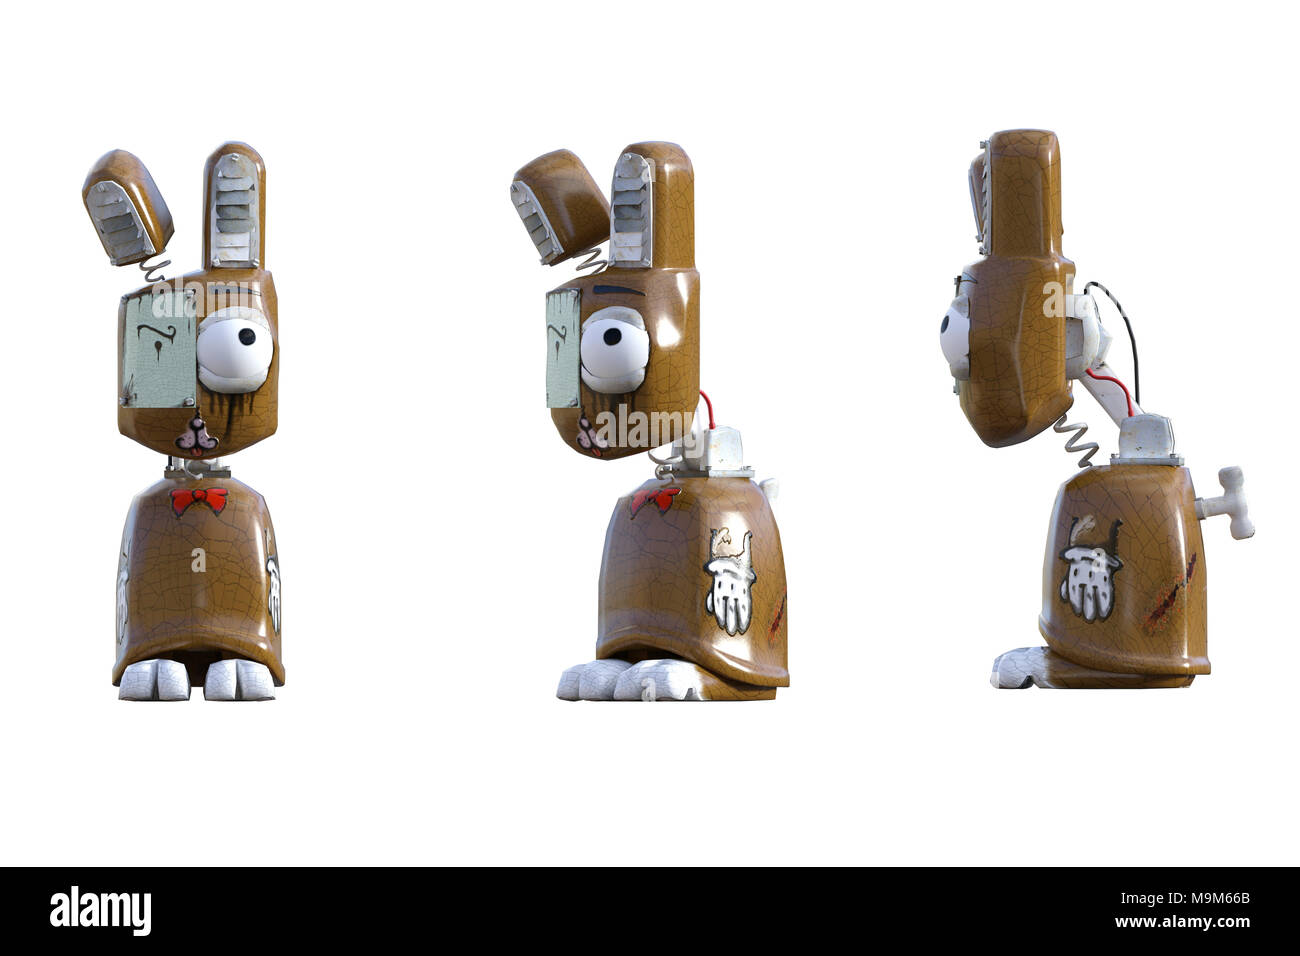 Crazy robot rabbit / bunny isolated on white, 3d render Stock Photo